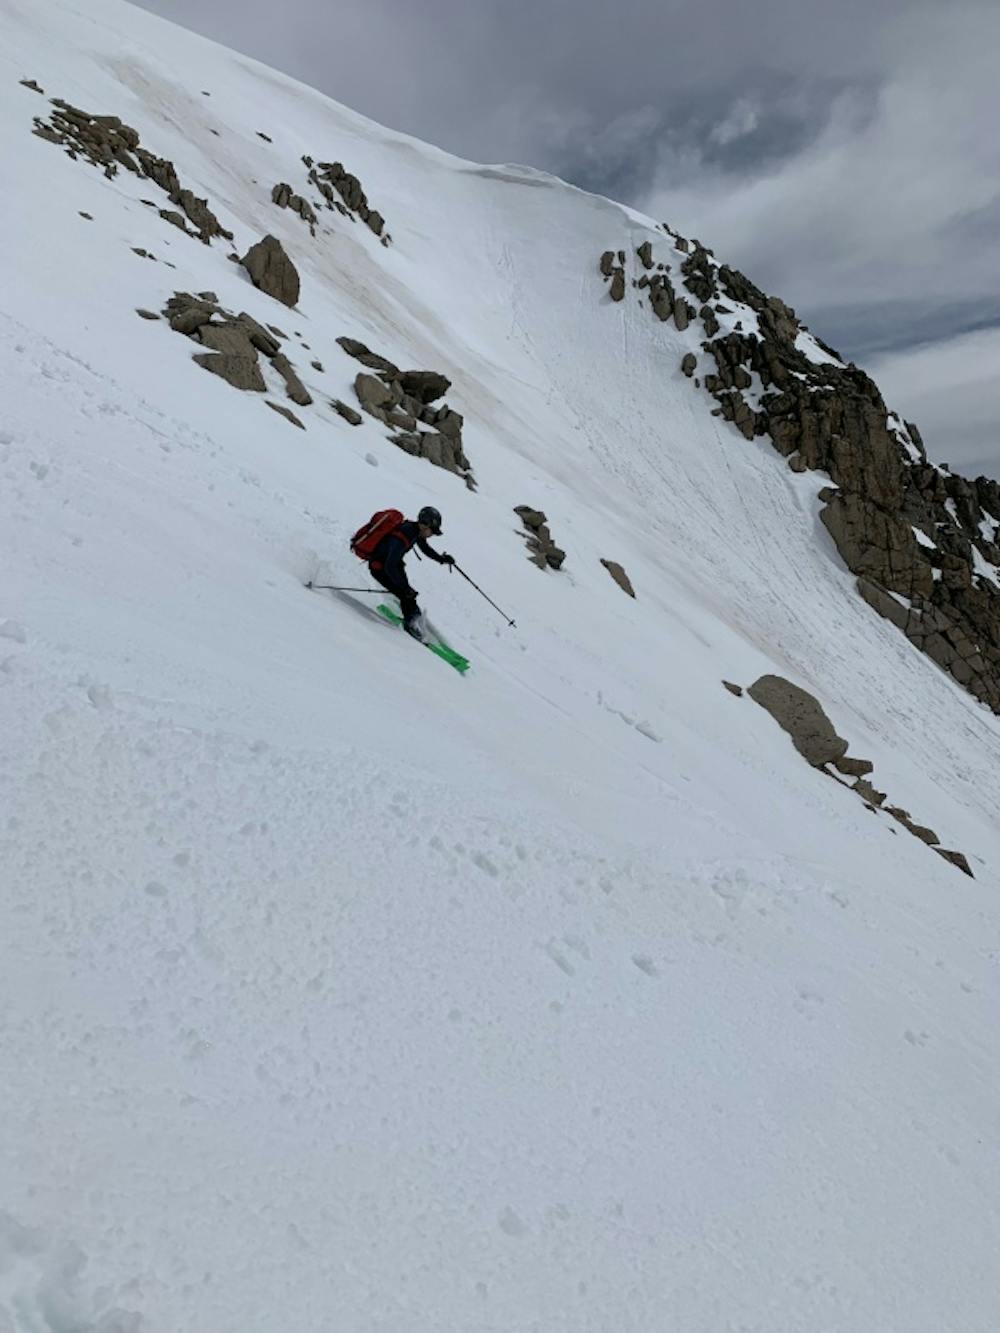 Evan skiing down the steeper part of the face.